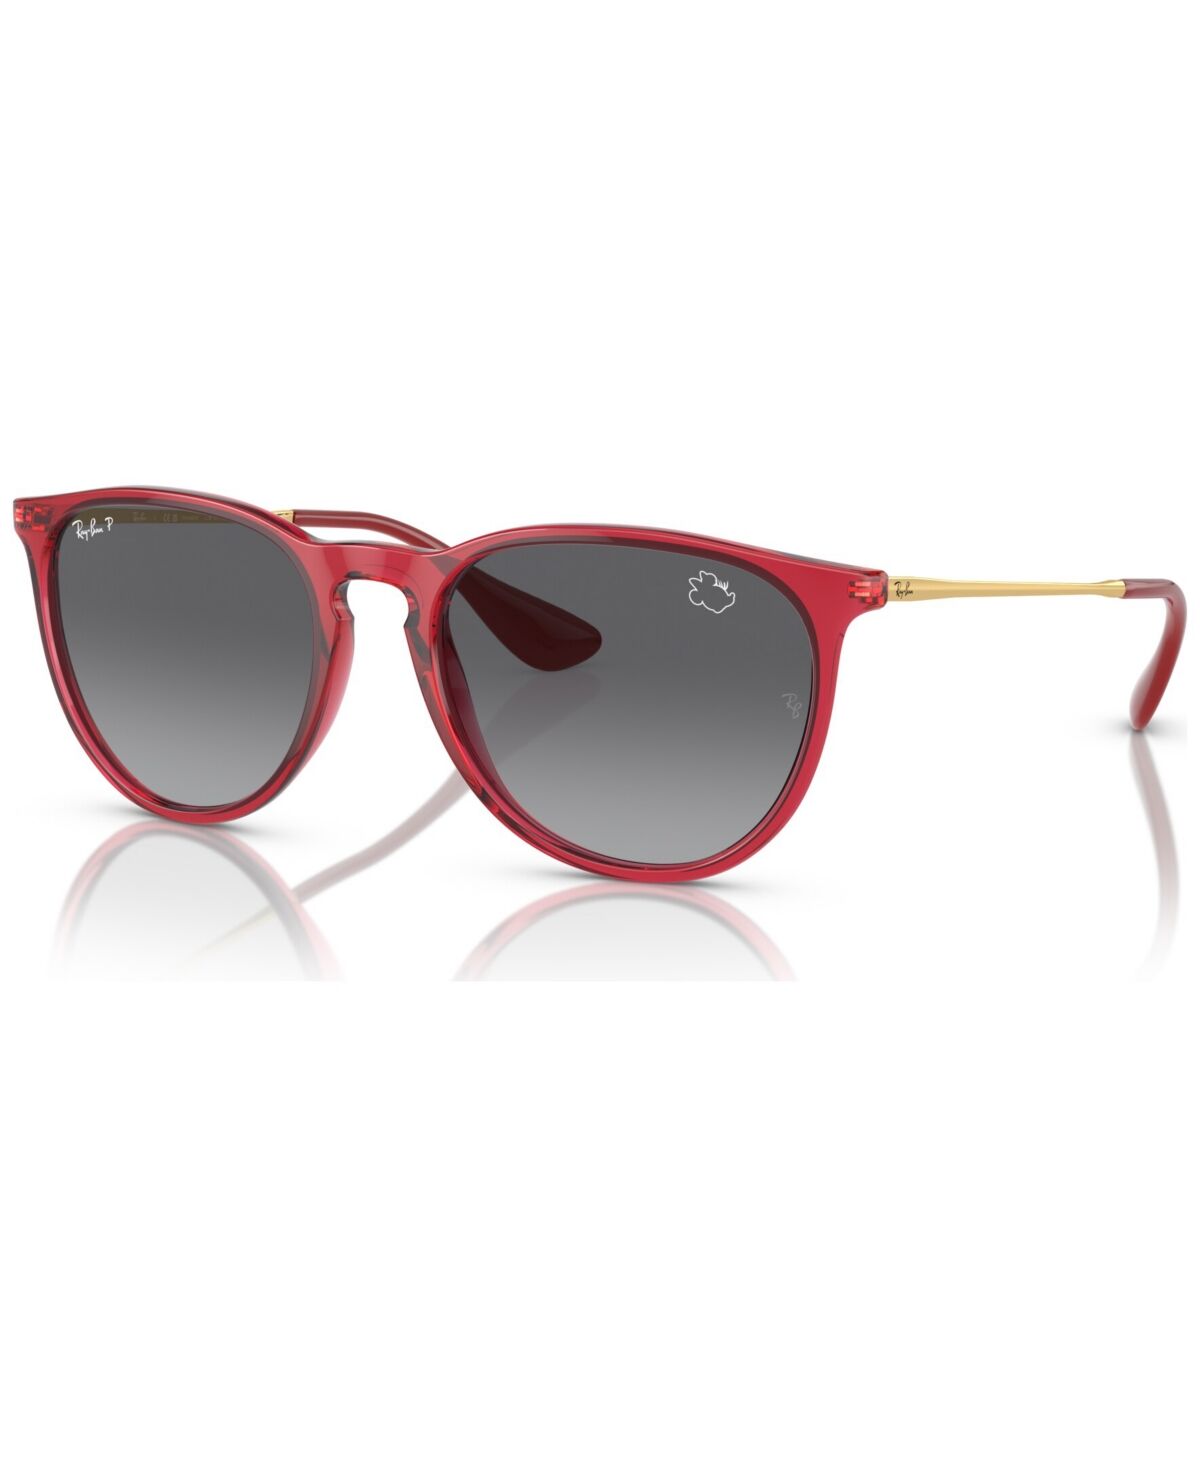 Ray-Ban Women's Polarized Sunglasses, RB4171 Disney Collection Erika - Transparent Red/ Minnie